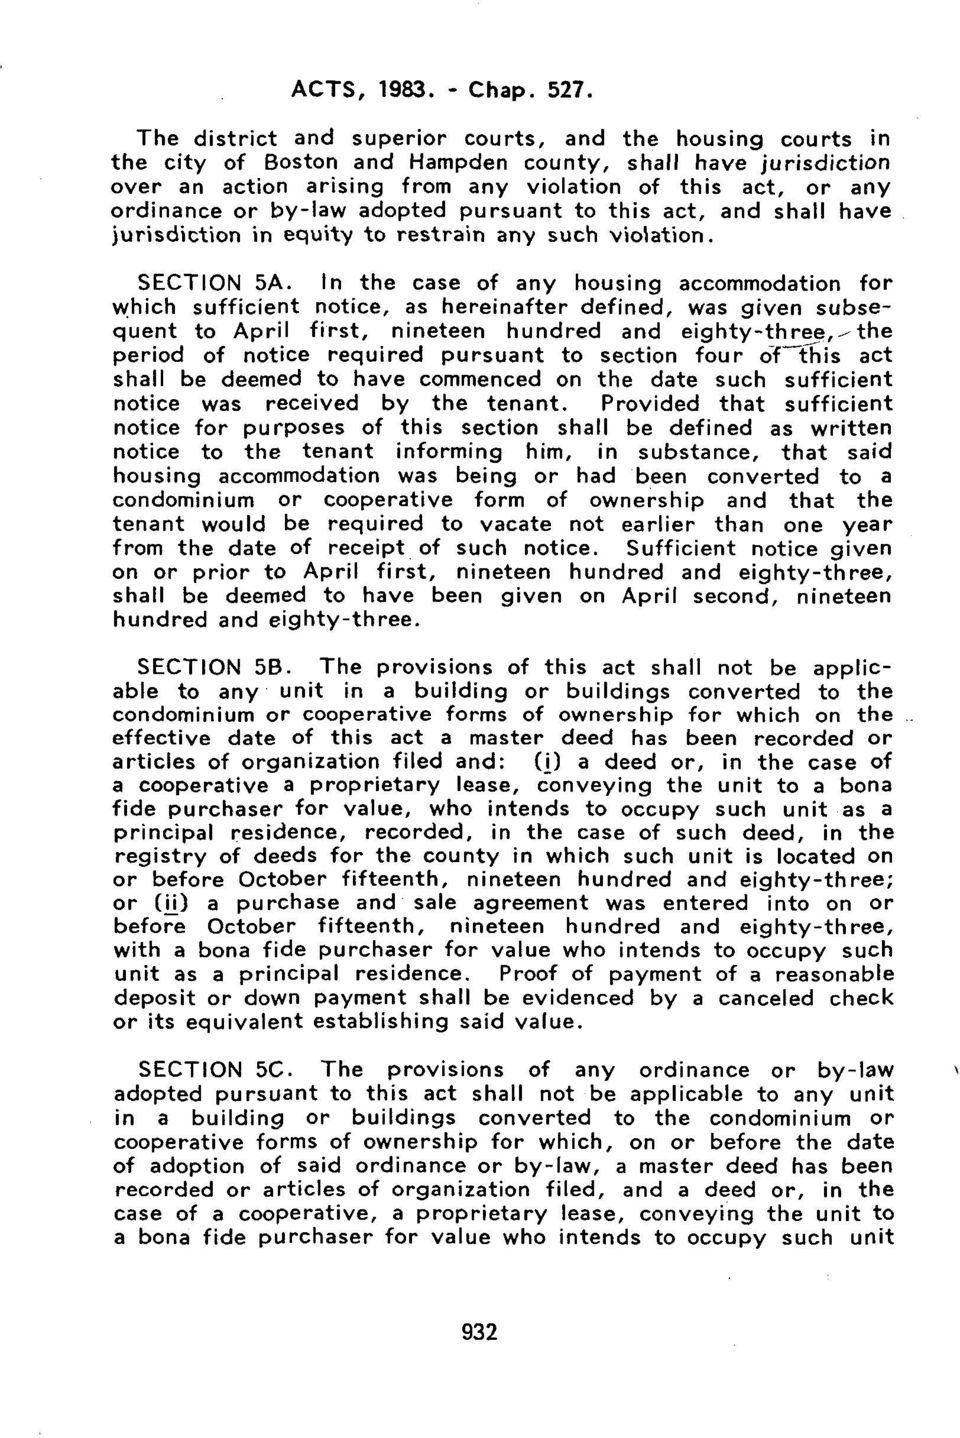 In the case of any housing accommodation for which sufficient notice, as hereinafter defined, was given subsequent to April first, nineteen hundred and eighty-three,--the period of notice required